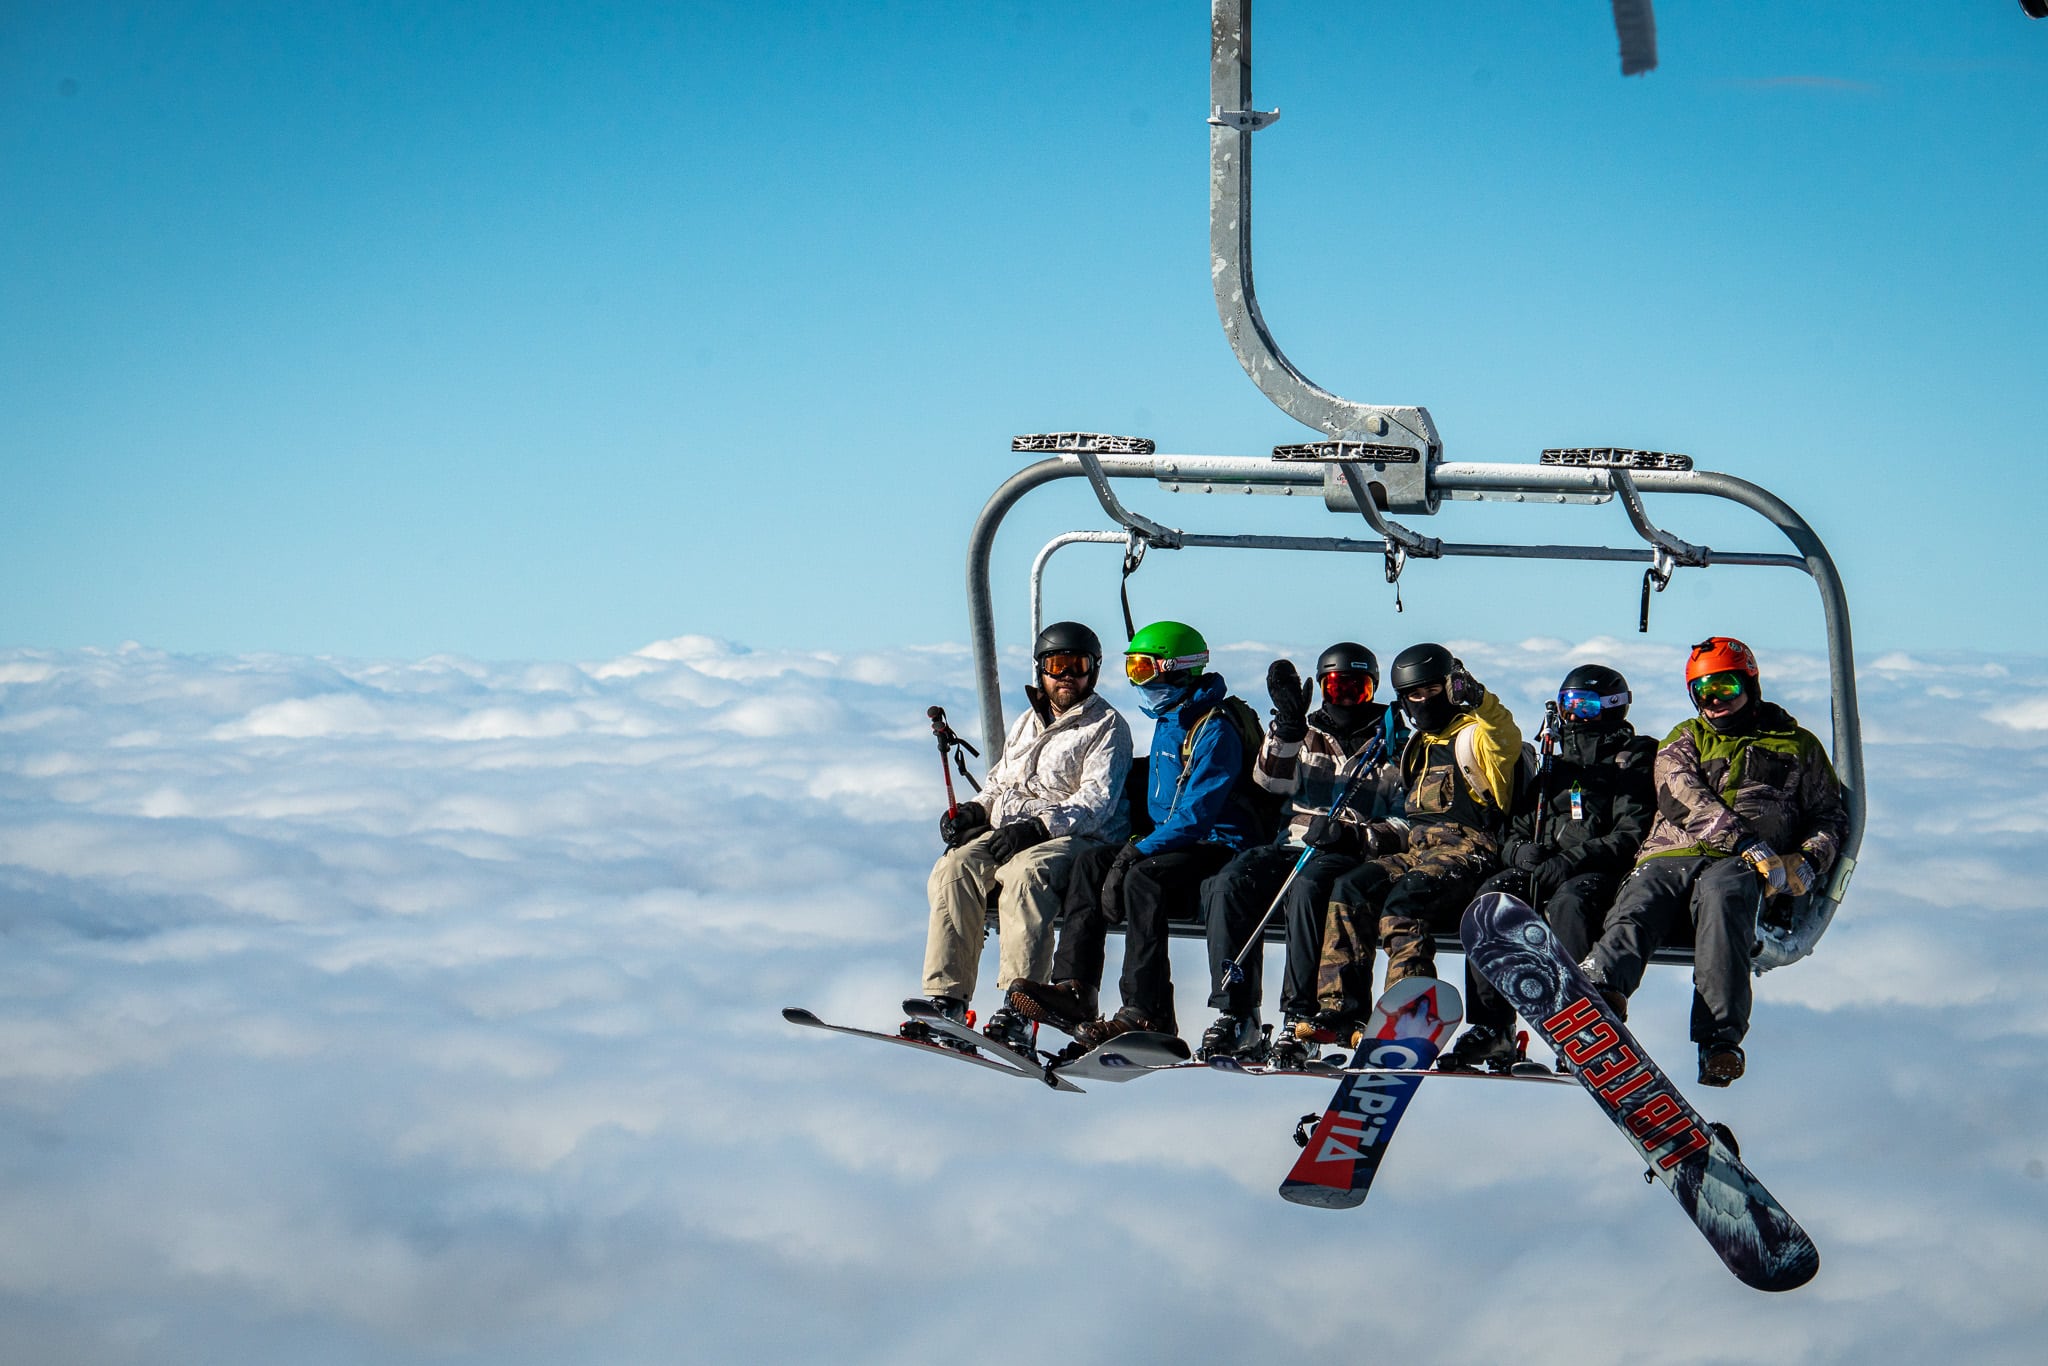 Riders on chairlift above clouds at Arizona Snowbowl.